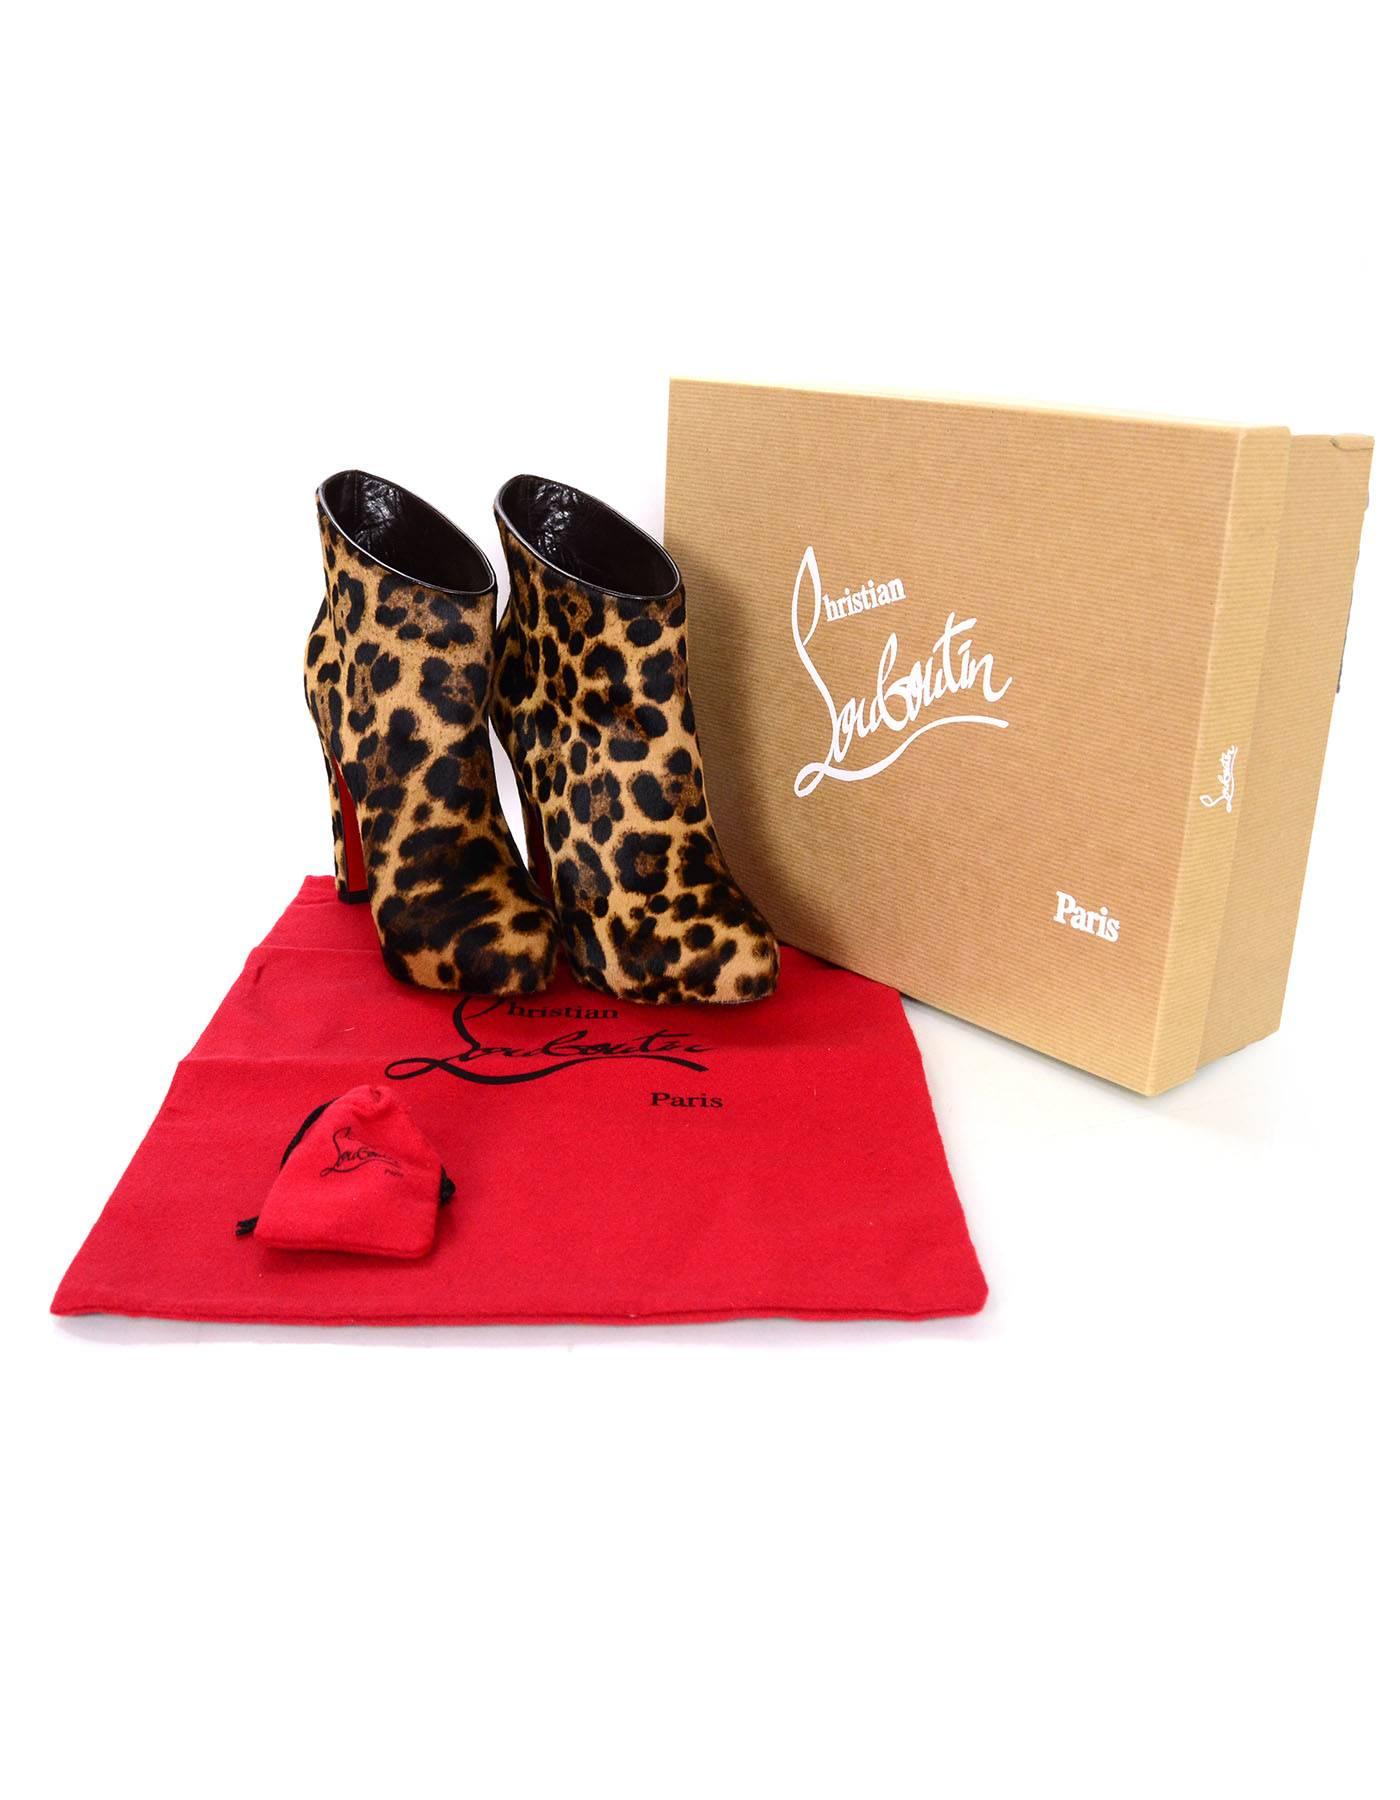 Christian Louboutin Leopard Print Ponyhair KST 120 Ankle Booties sz 37.5 In Excellent Condition In New York, NY